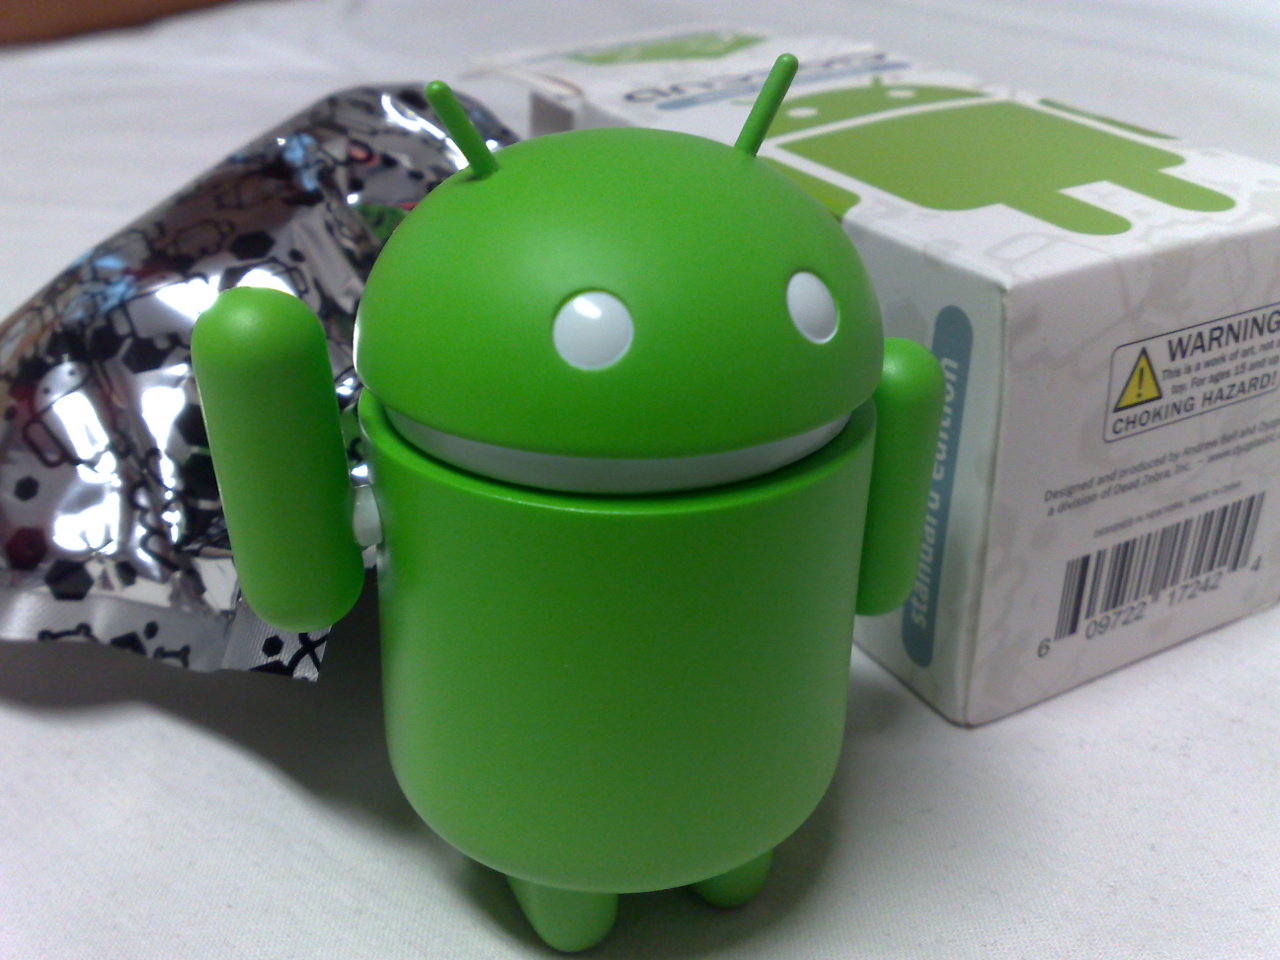 Android_green_figure_next_to_its_original_packaging 